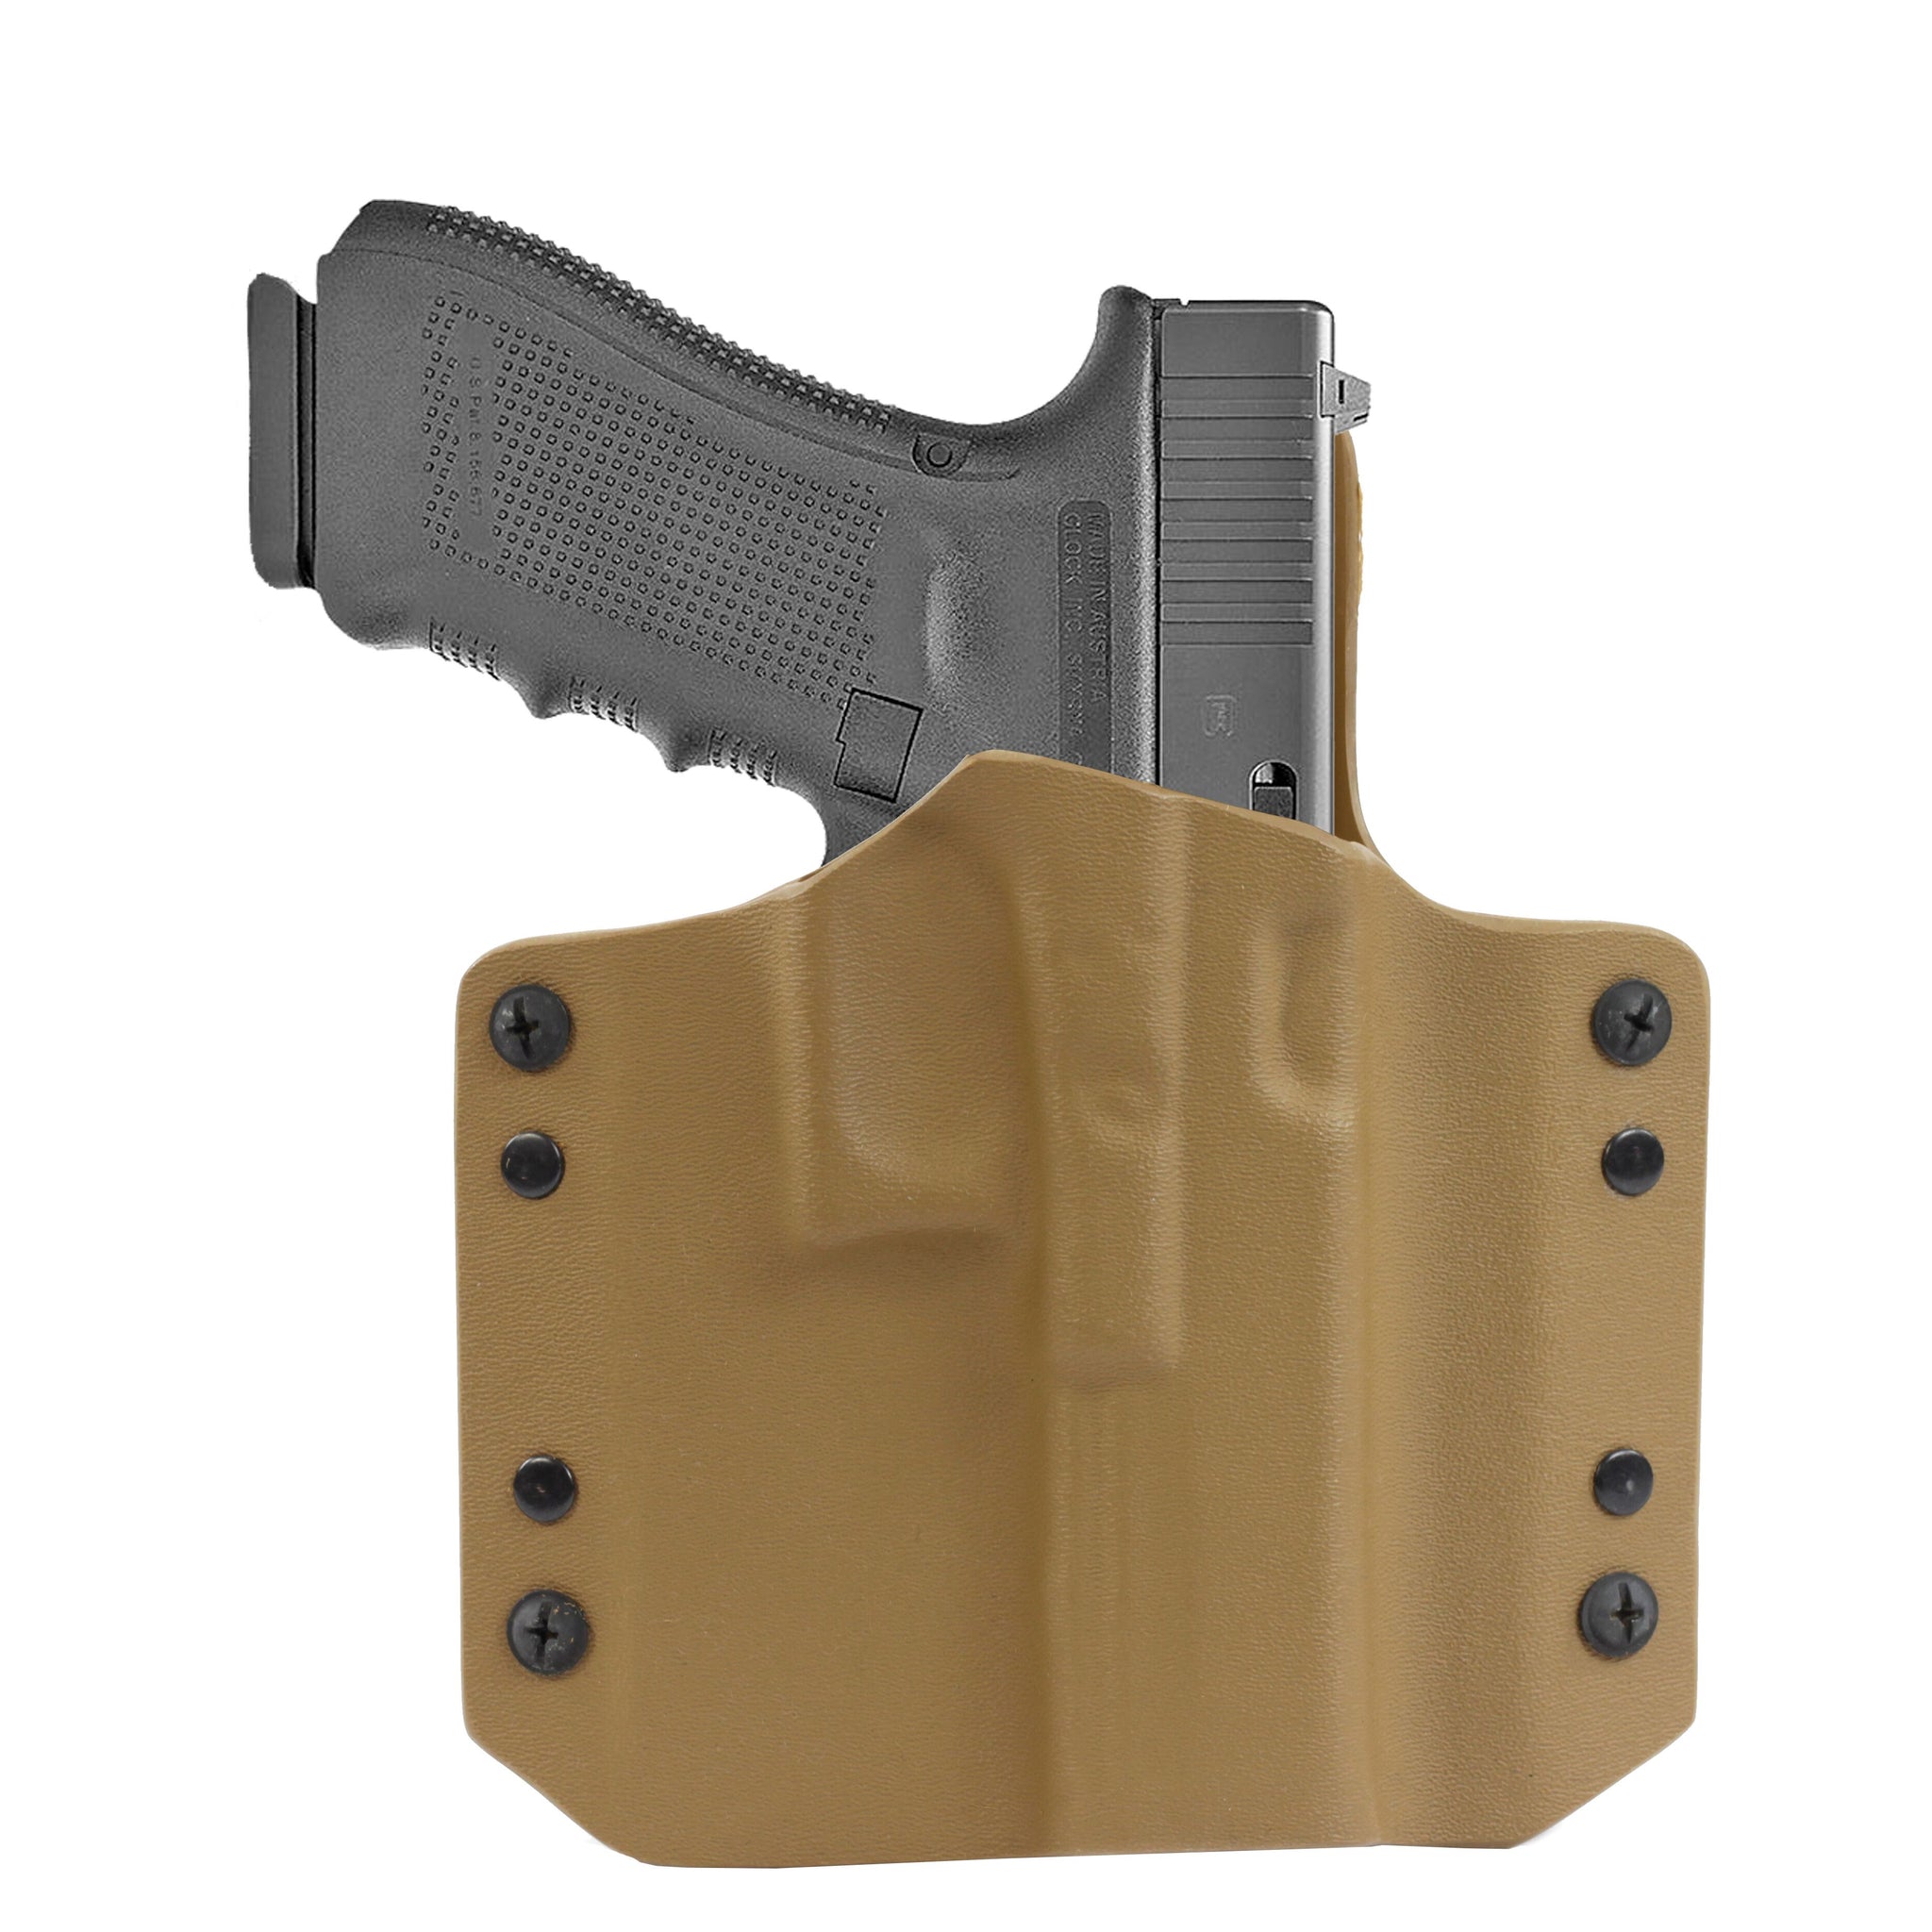 Ares Kydex Holster Glock -17/19 by Warrior Assault Systems – Black Bear Gear